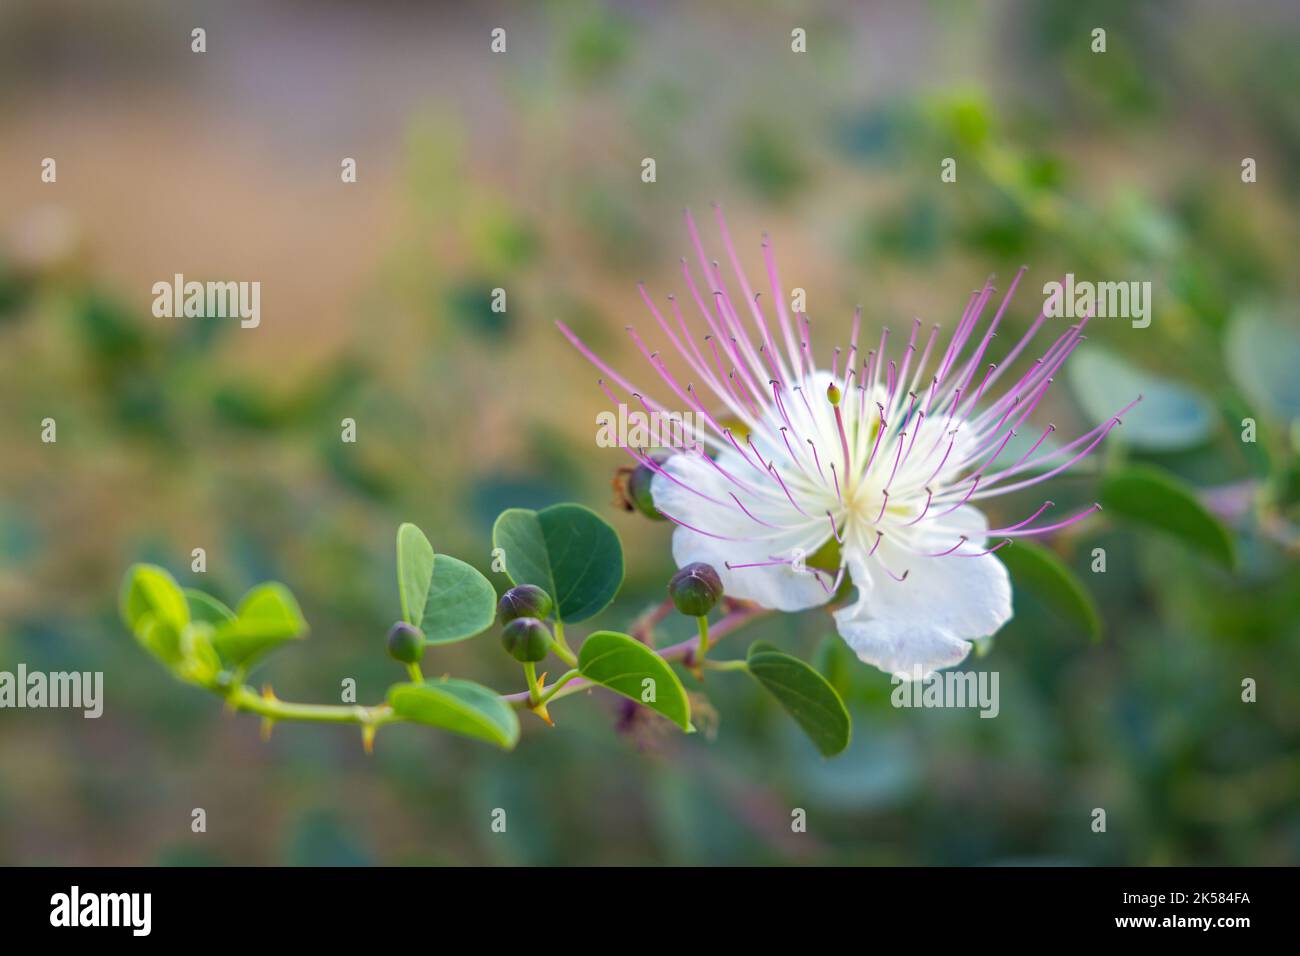 Flinders rose (Capparis spinosa) flower on a blurred background. Stock Photo